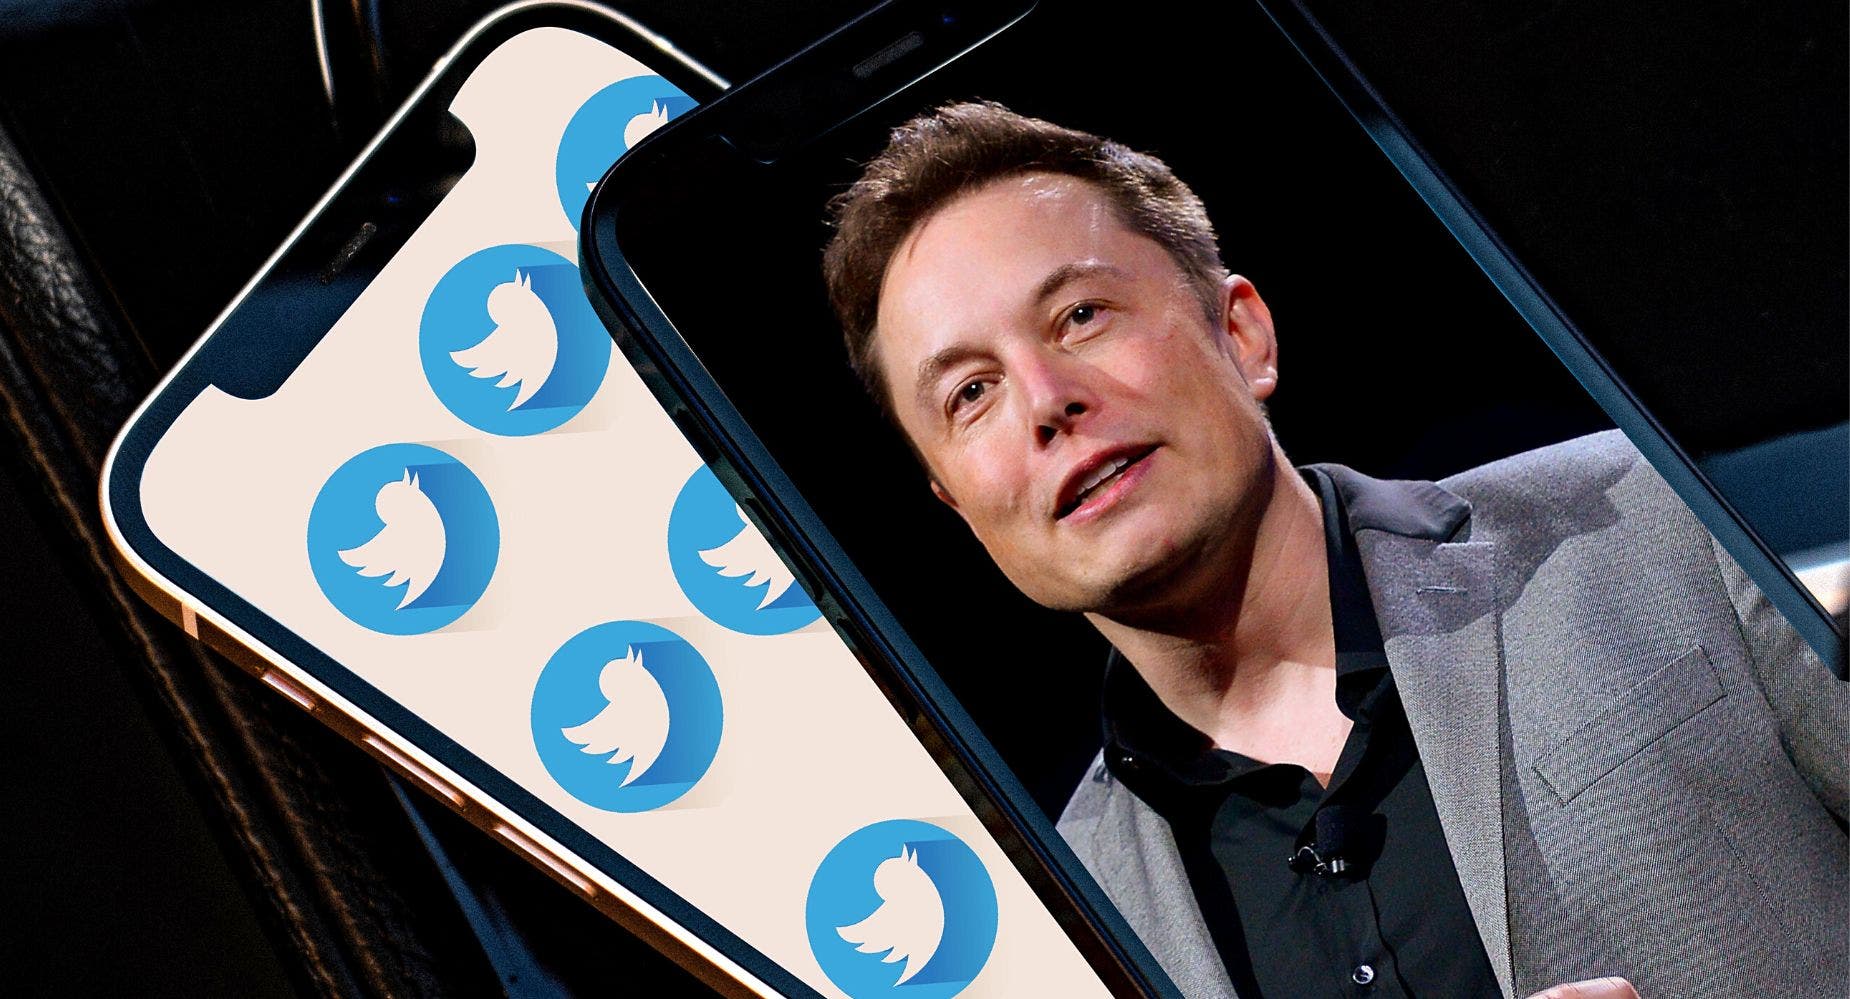 Elon Musk's Blue Check Verification Hurts: 8 Companies That Took A Hit From Twitter Account Impersonators